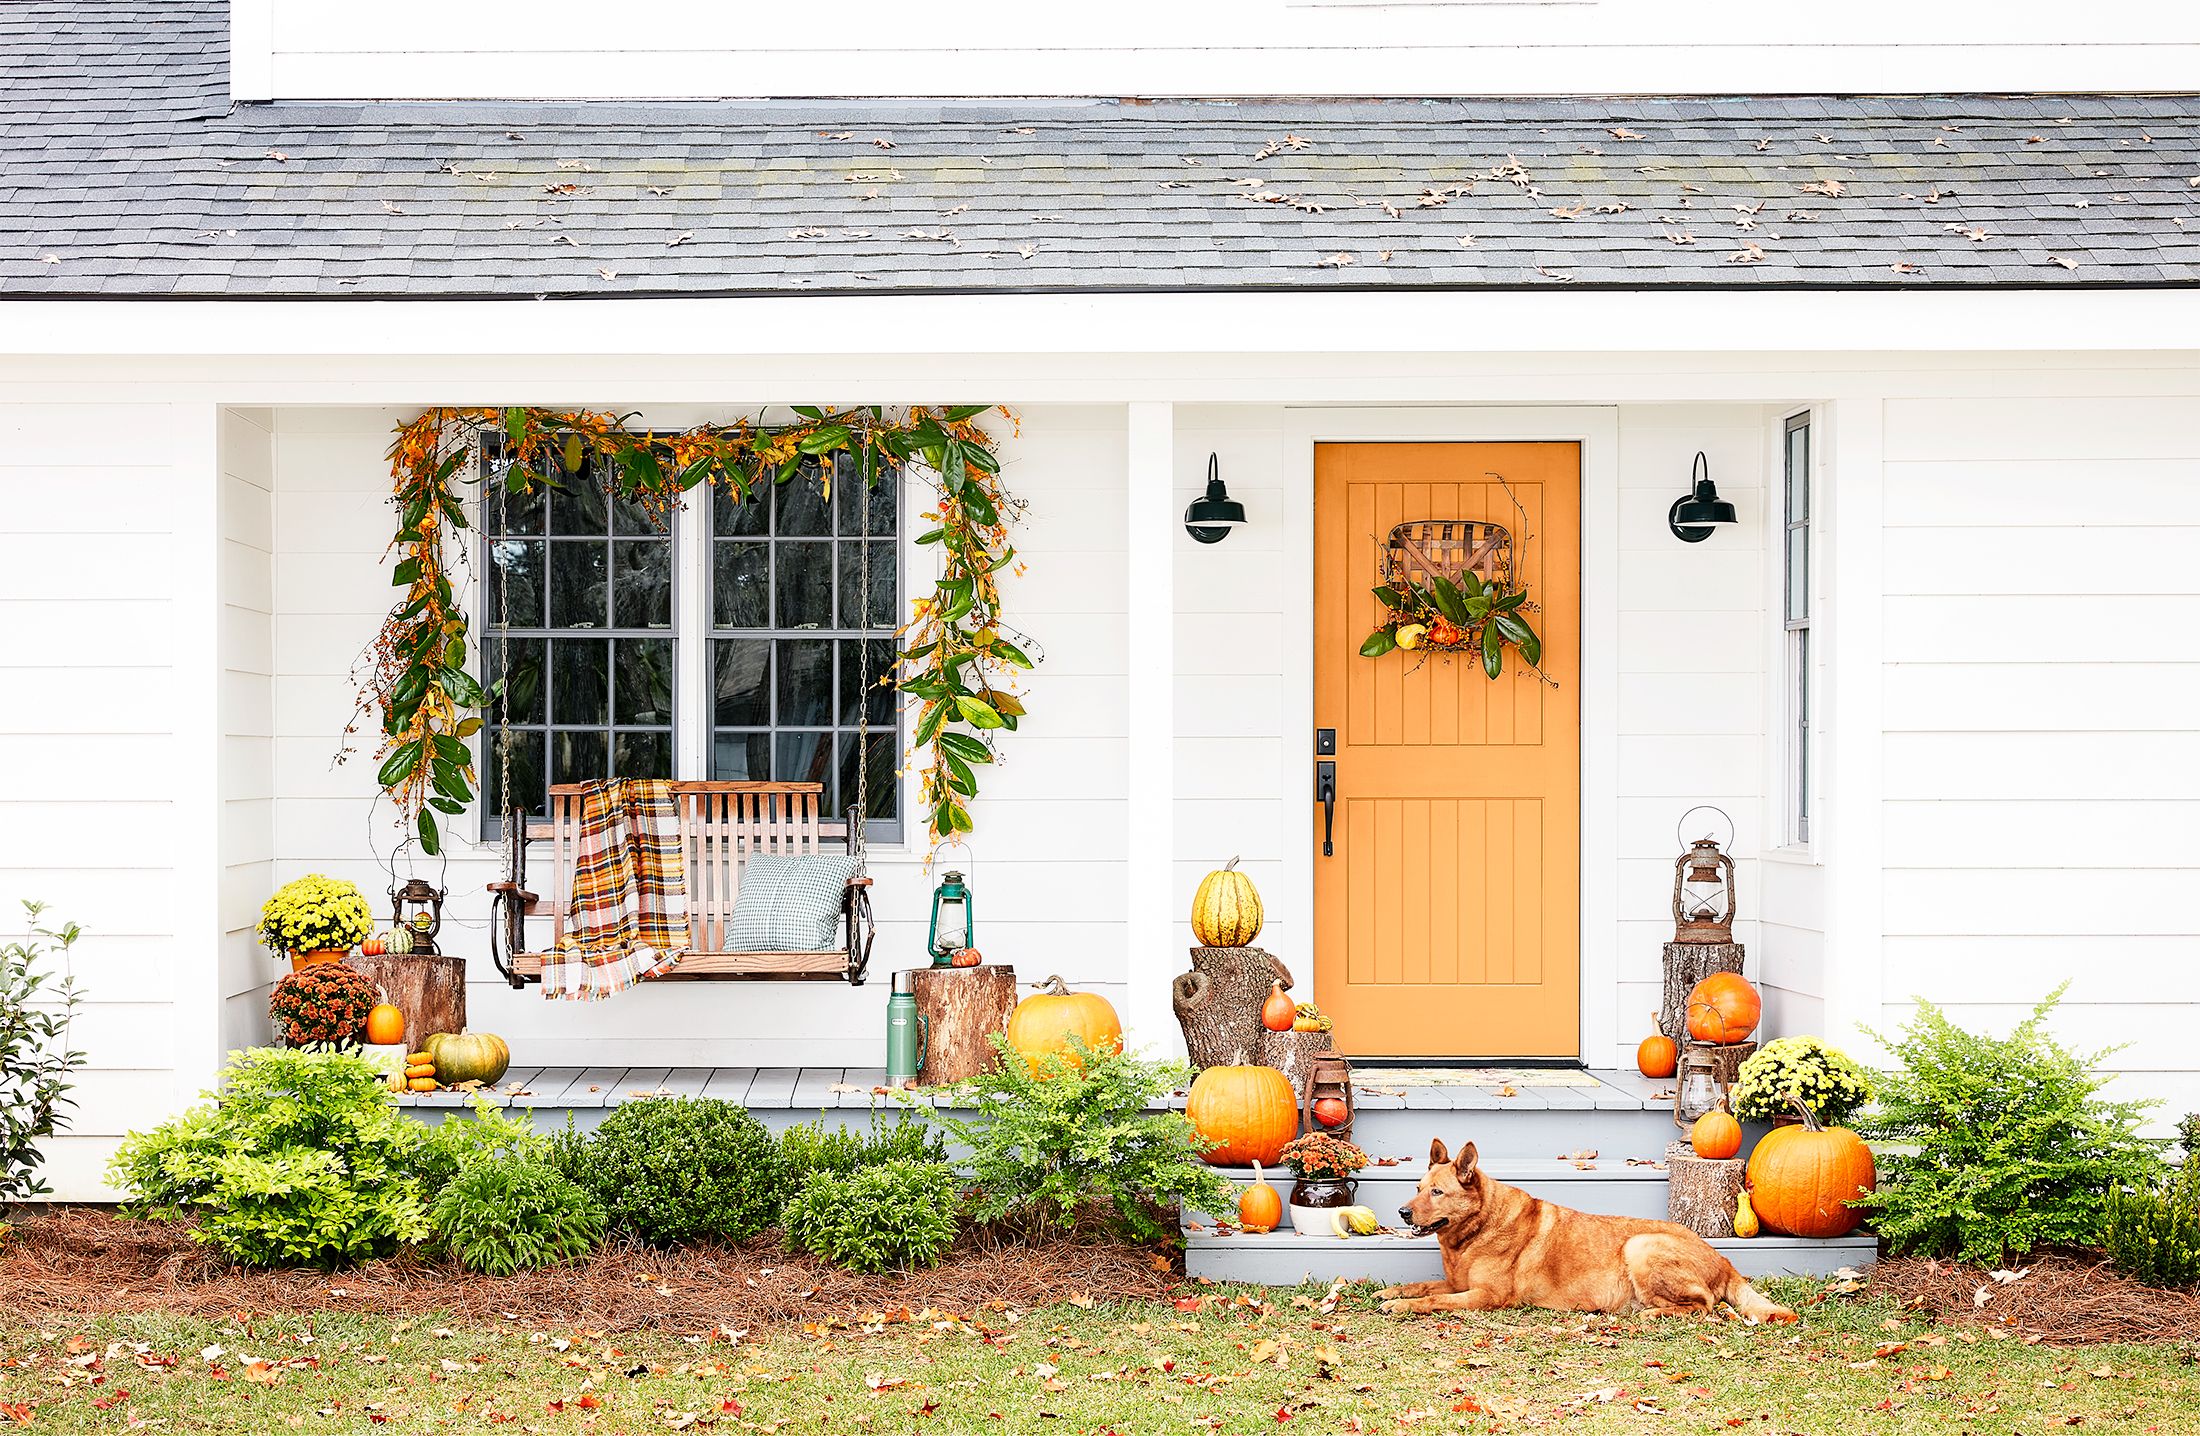 50 Easy Fall Home Decorating Ideas to Cozy Up Your Home